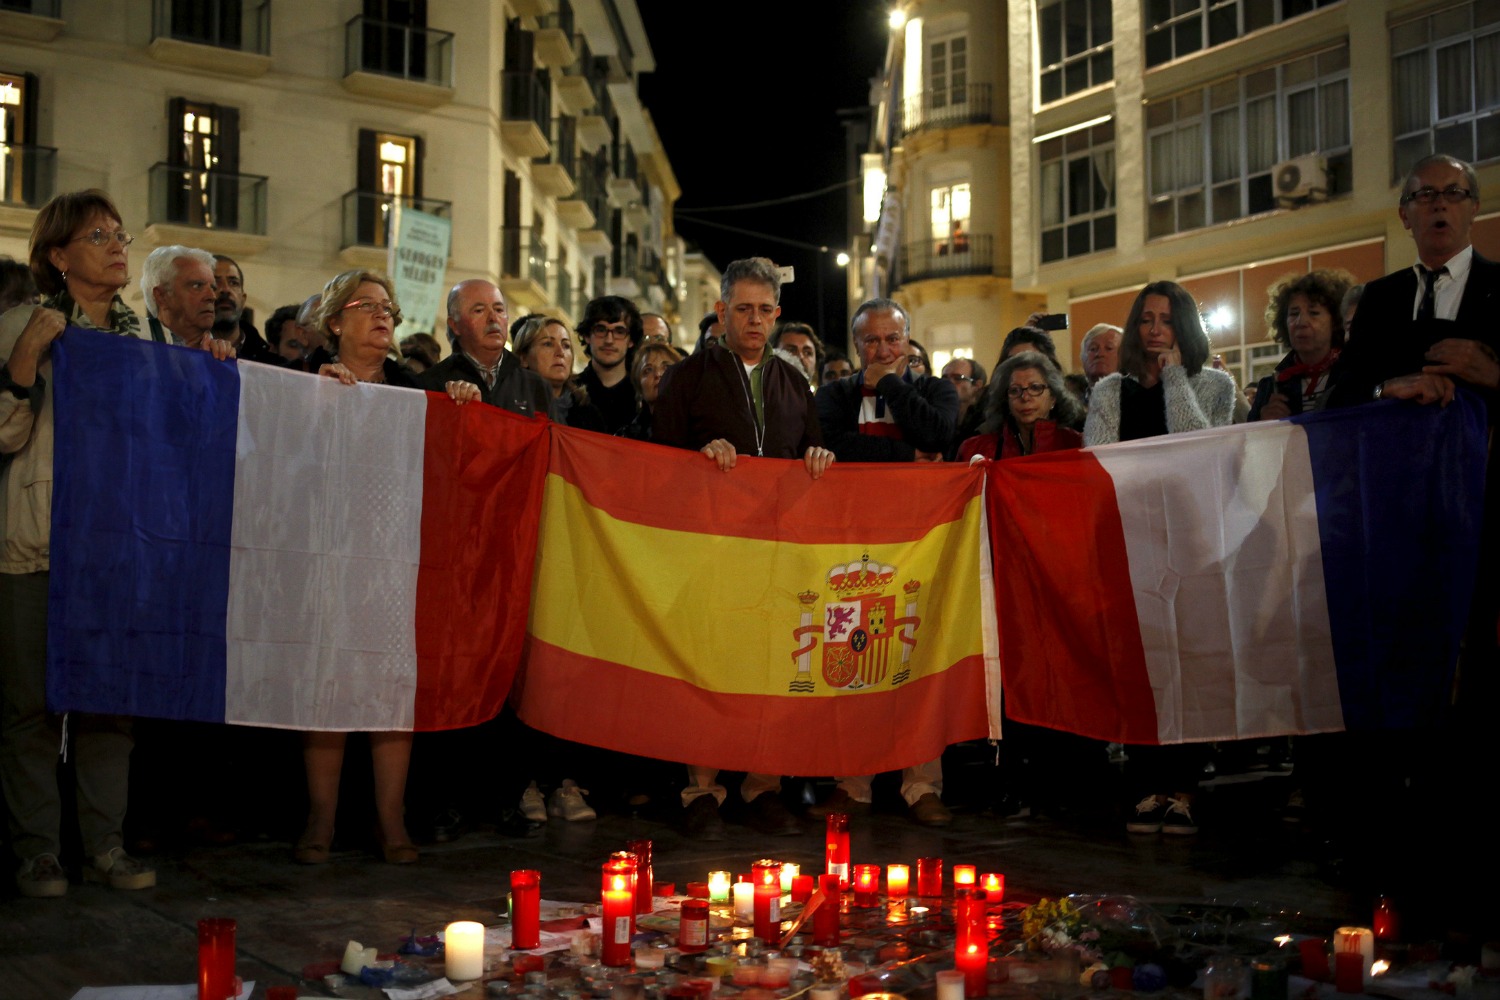 France informs there is another Spanish citizen among the Paris victims